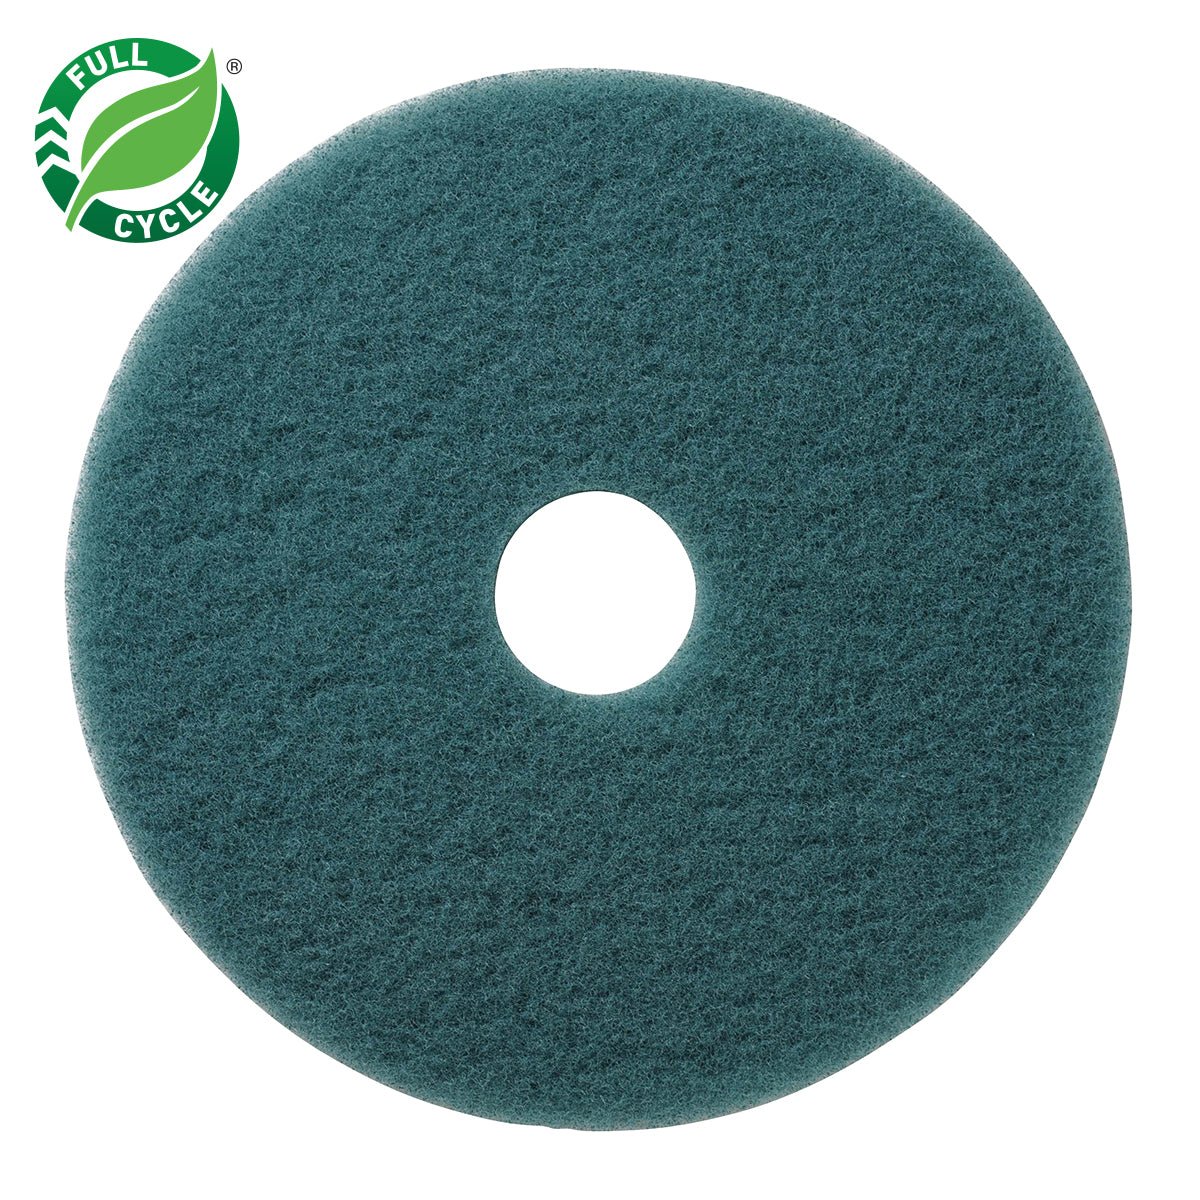 3M CLEANING GREEN PAD Yeg Epoxy supplies